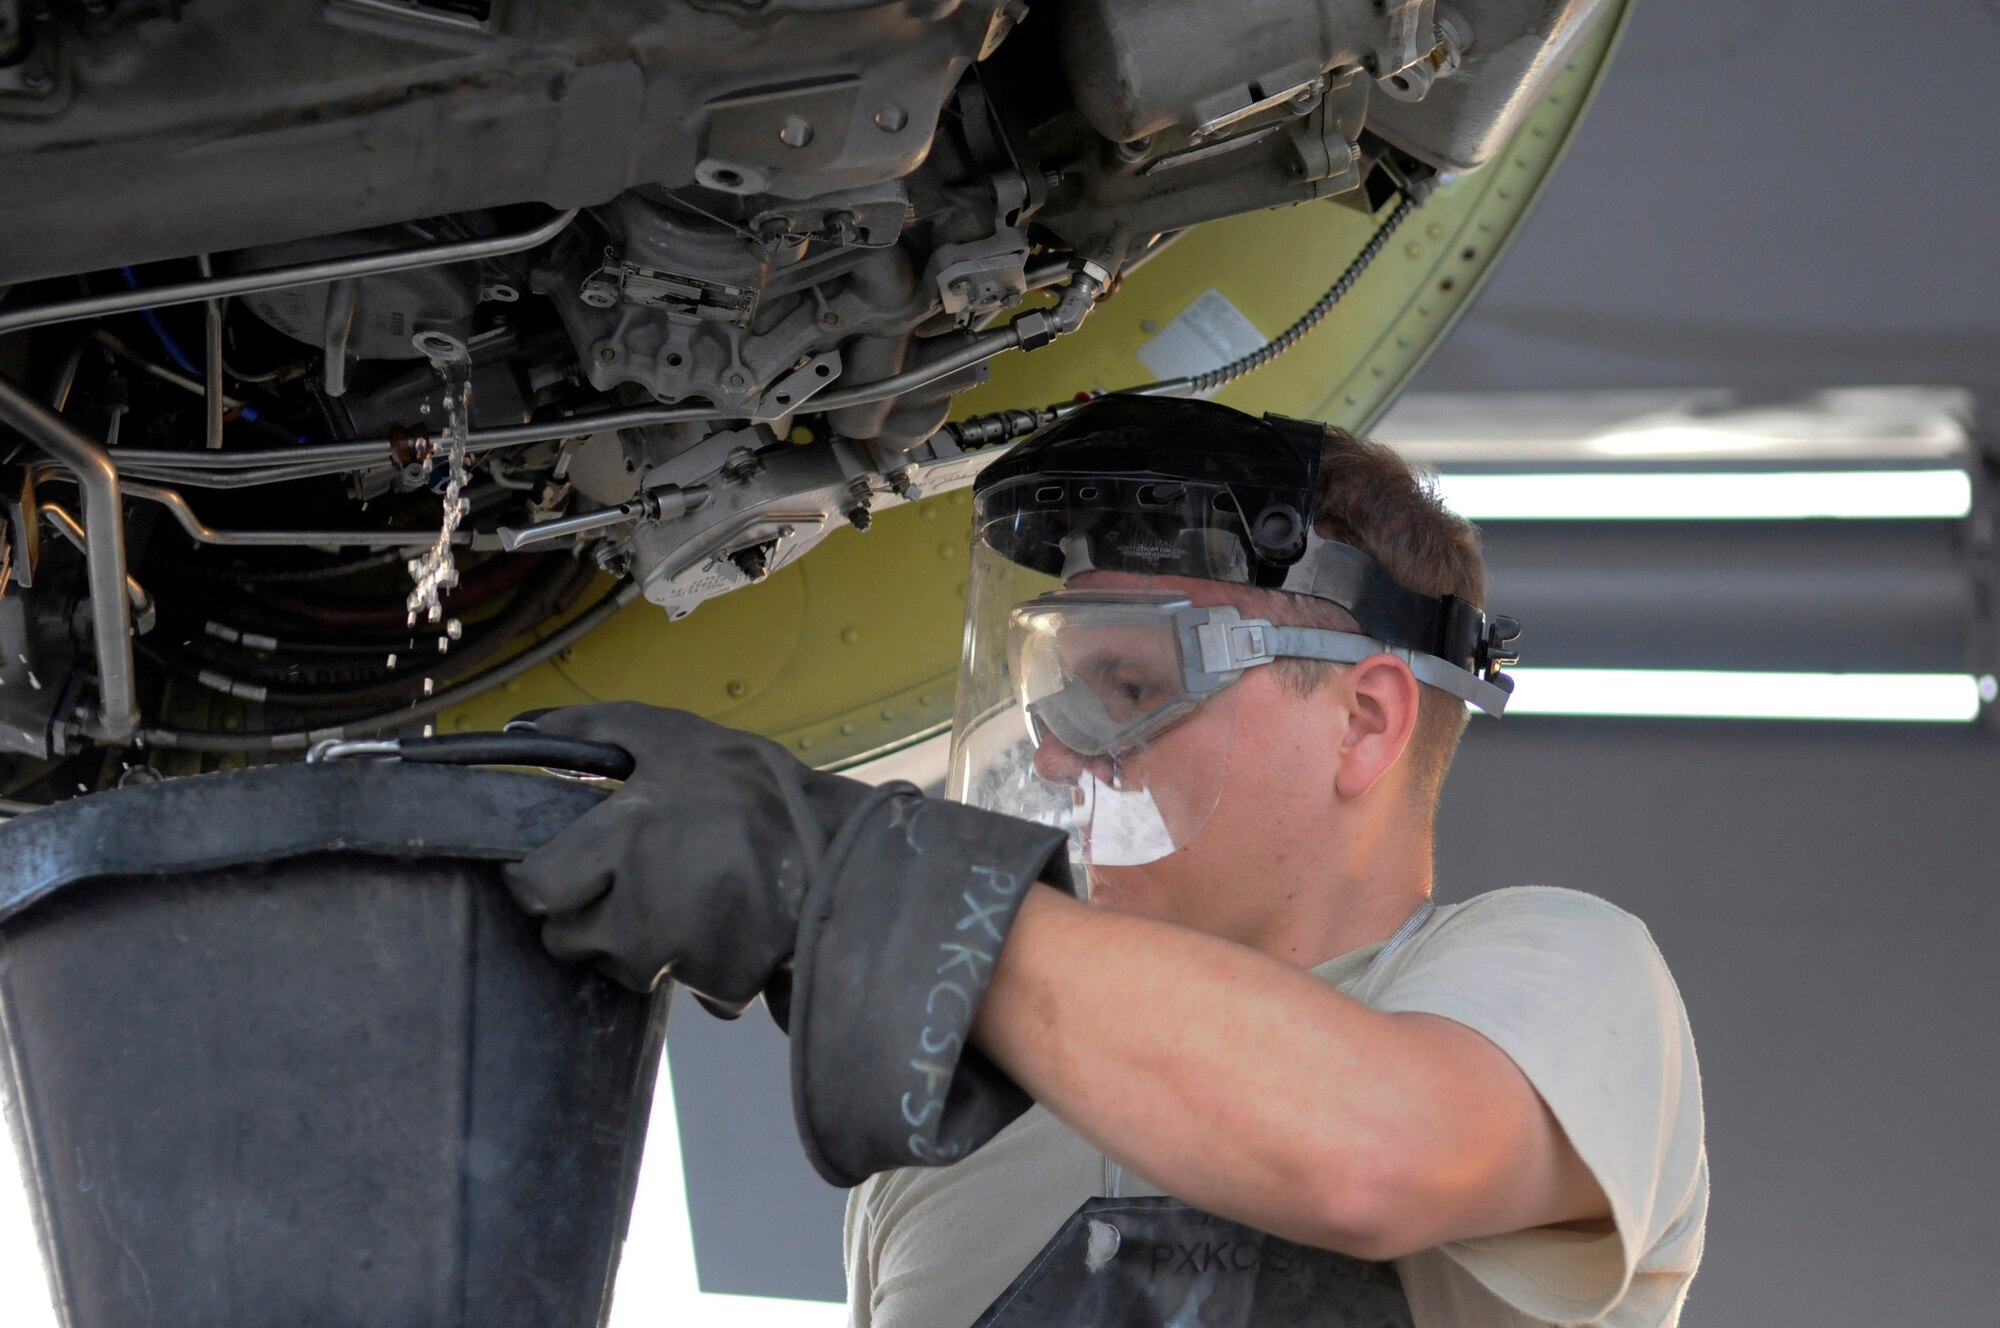 Staff Sgt. Anthony Hernandez, 379th Expeditionary Aircraft Maintenance Squadron, holds a bucket catching extra fuel after removing the fuel filter during a 120-hour inspection on a KC-135 Stratotanker engine, Nov. 20, at an undisclosed air base in Southwest Asia.   The KC-135 Stratotanker provides the core aerial refueling capability for the United States Air Force and also provides aerial refueling support to Navy, Marine Corps and allied nation aircraft in the Central Command area of responsibility.  Sergeant Hernandez is a native of Barstow, Calif., and is deployed from McConnell Air Force Base, Kan., in support of Operations Iraqi and Enduring Freedom and Joint Task Force-Horn of Africa.  (U.S. Air Force photo by Tech. Sgt. Michael Boquette/Released)